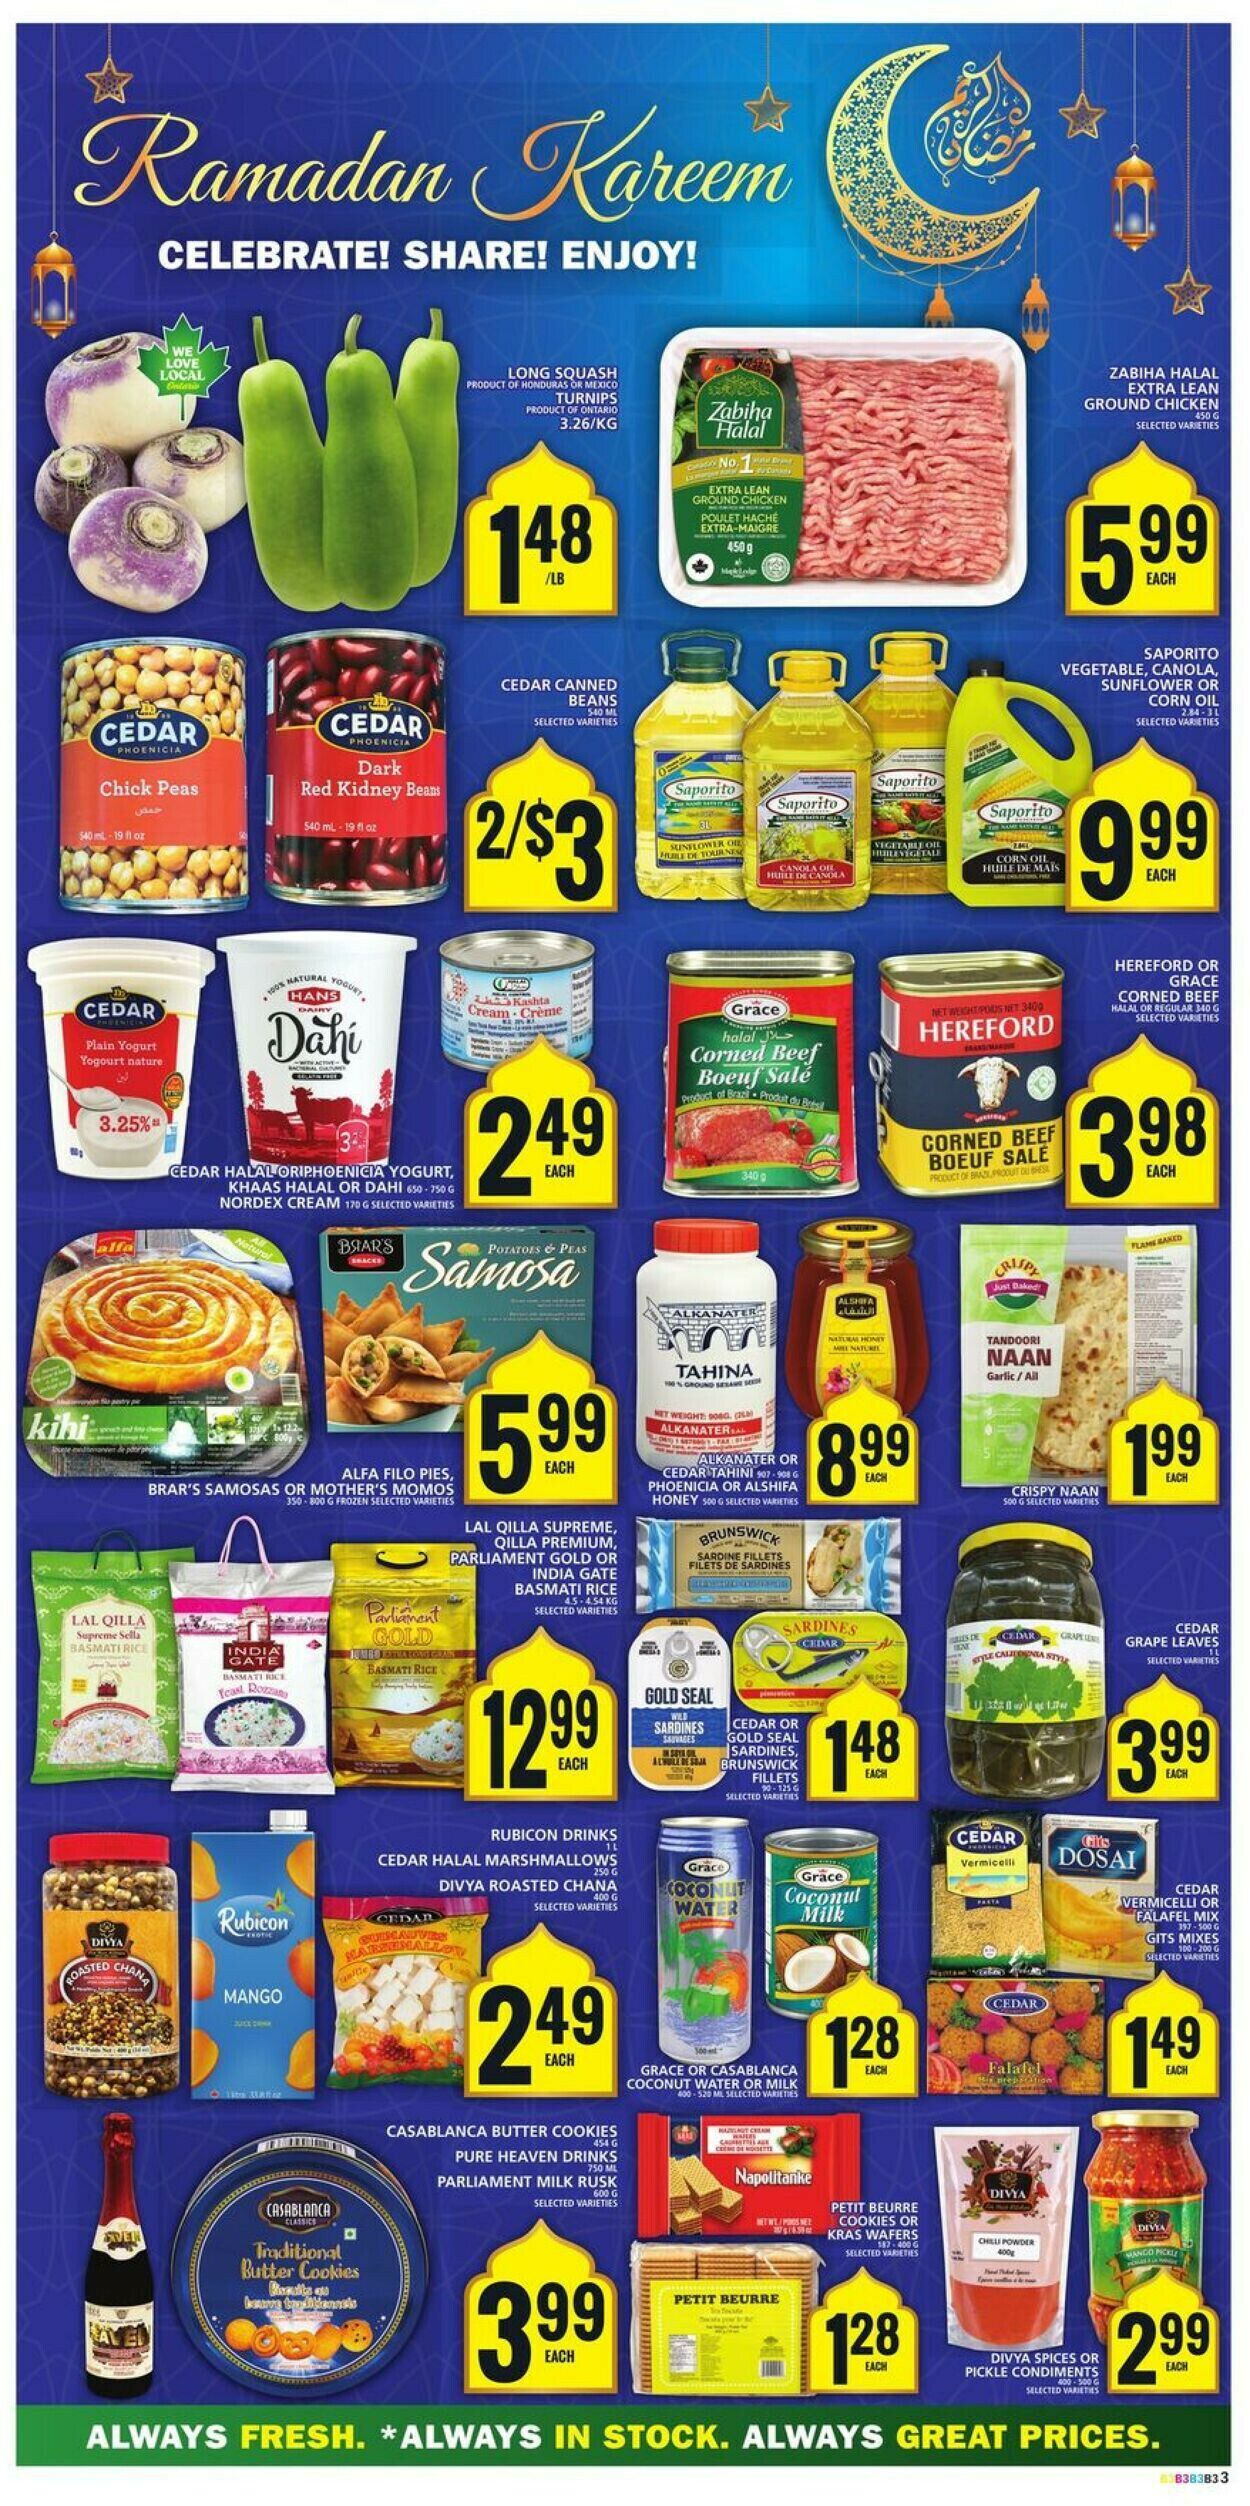 Food Basics Flyer from 02/29/2024